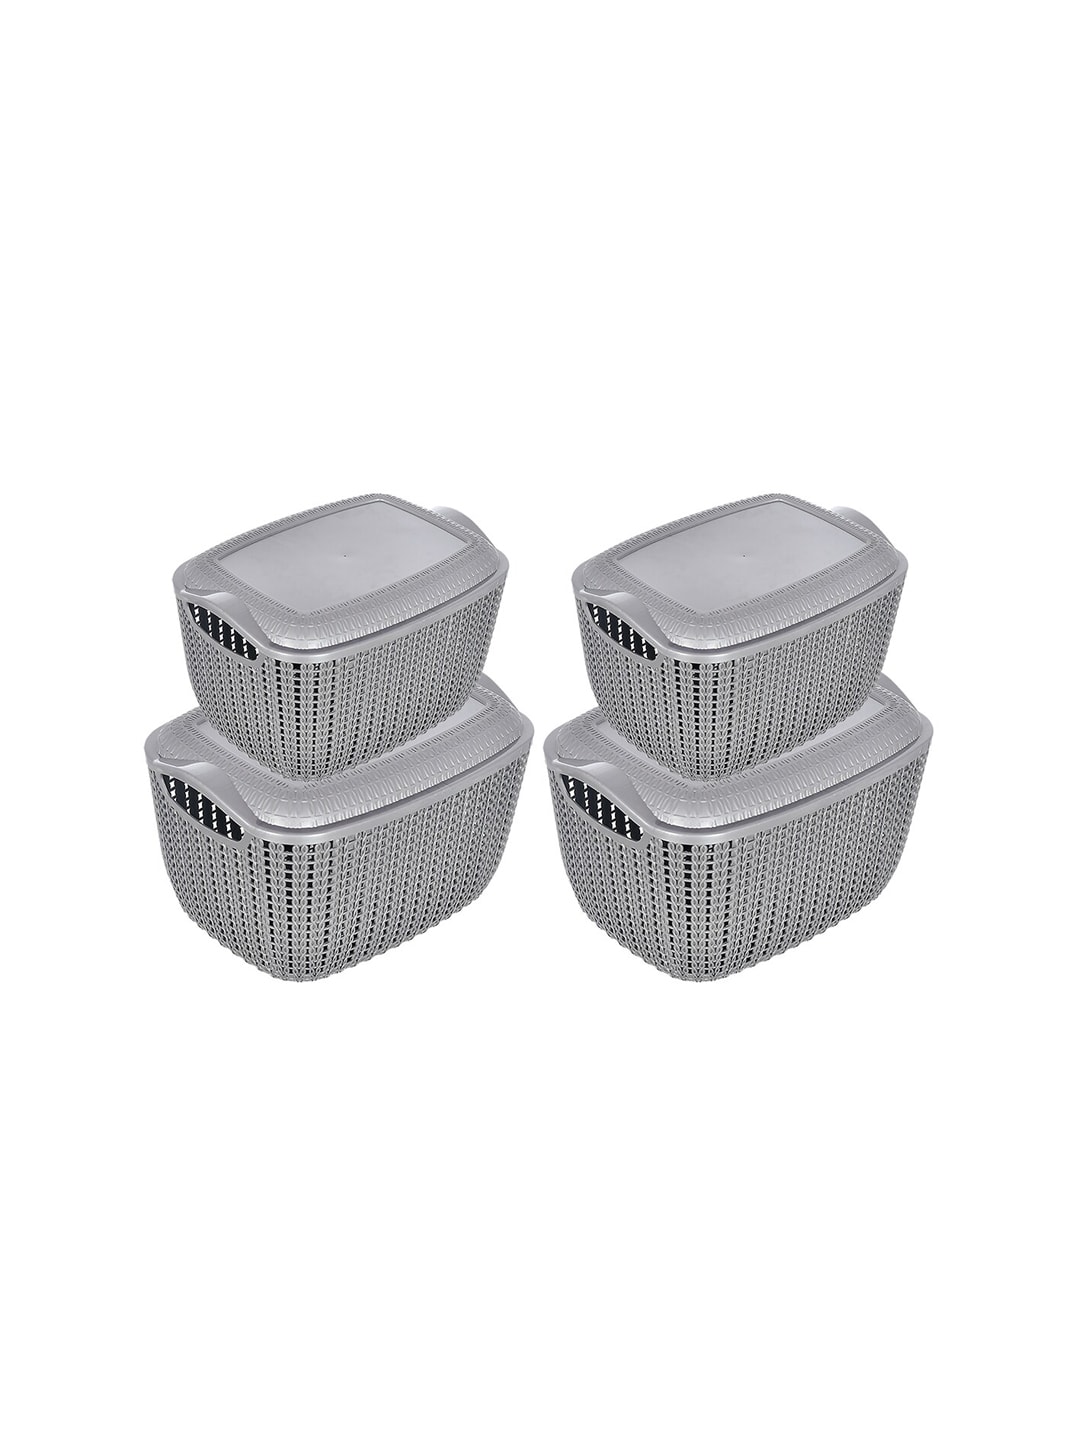 Kuber Industries Set Of 4 Grey Textured Multipurpose Plastic Basket With Lids Price in India